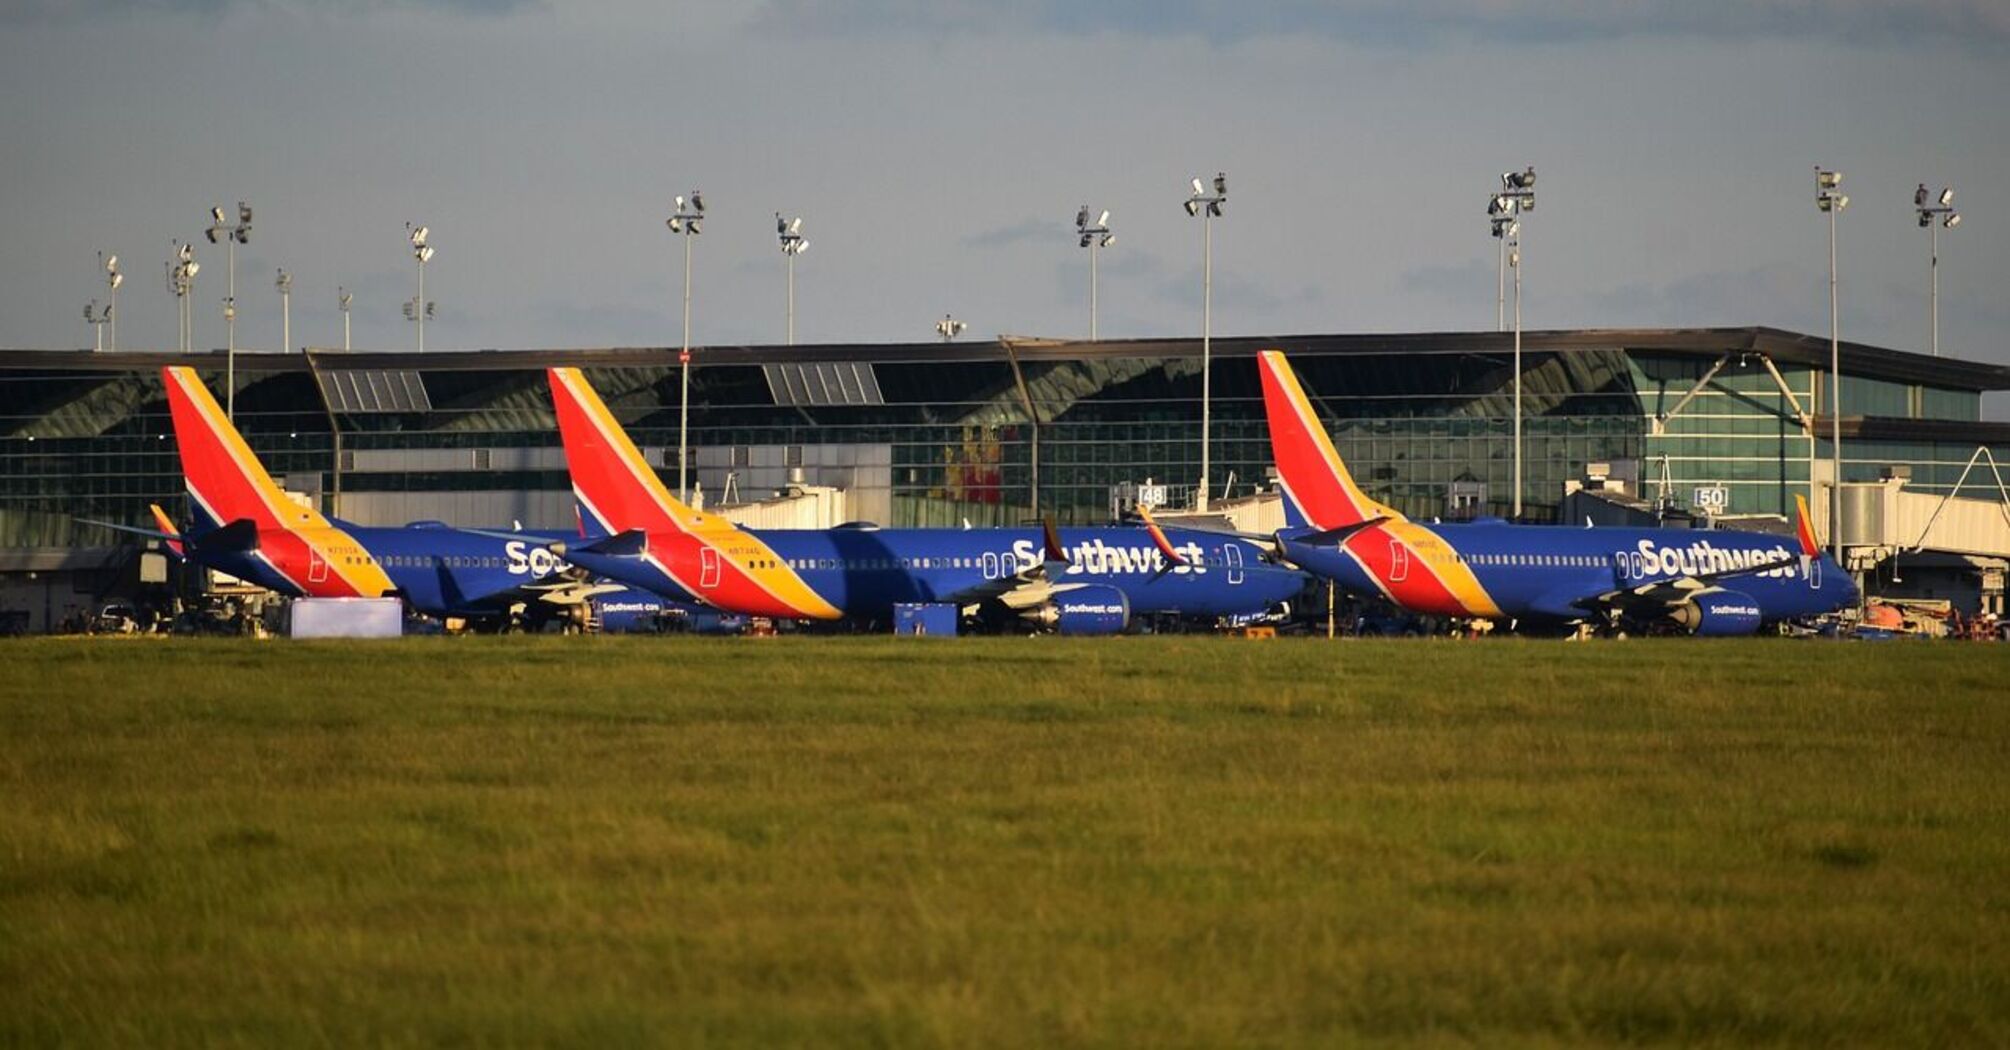 Southwest Airlines will add new seasonal flights within the United States and to international destinations